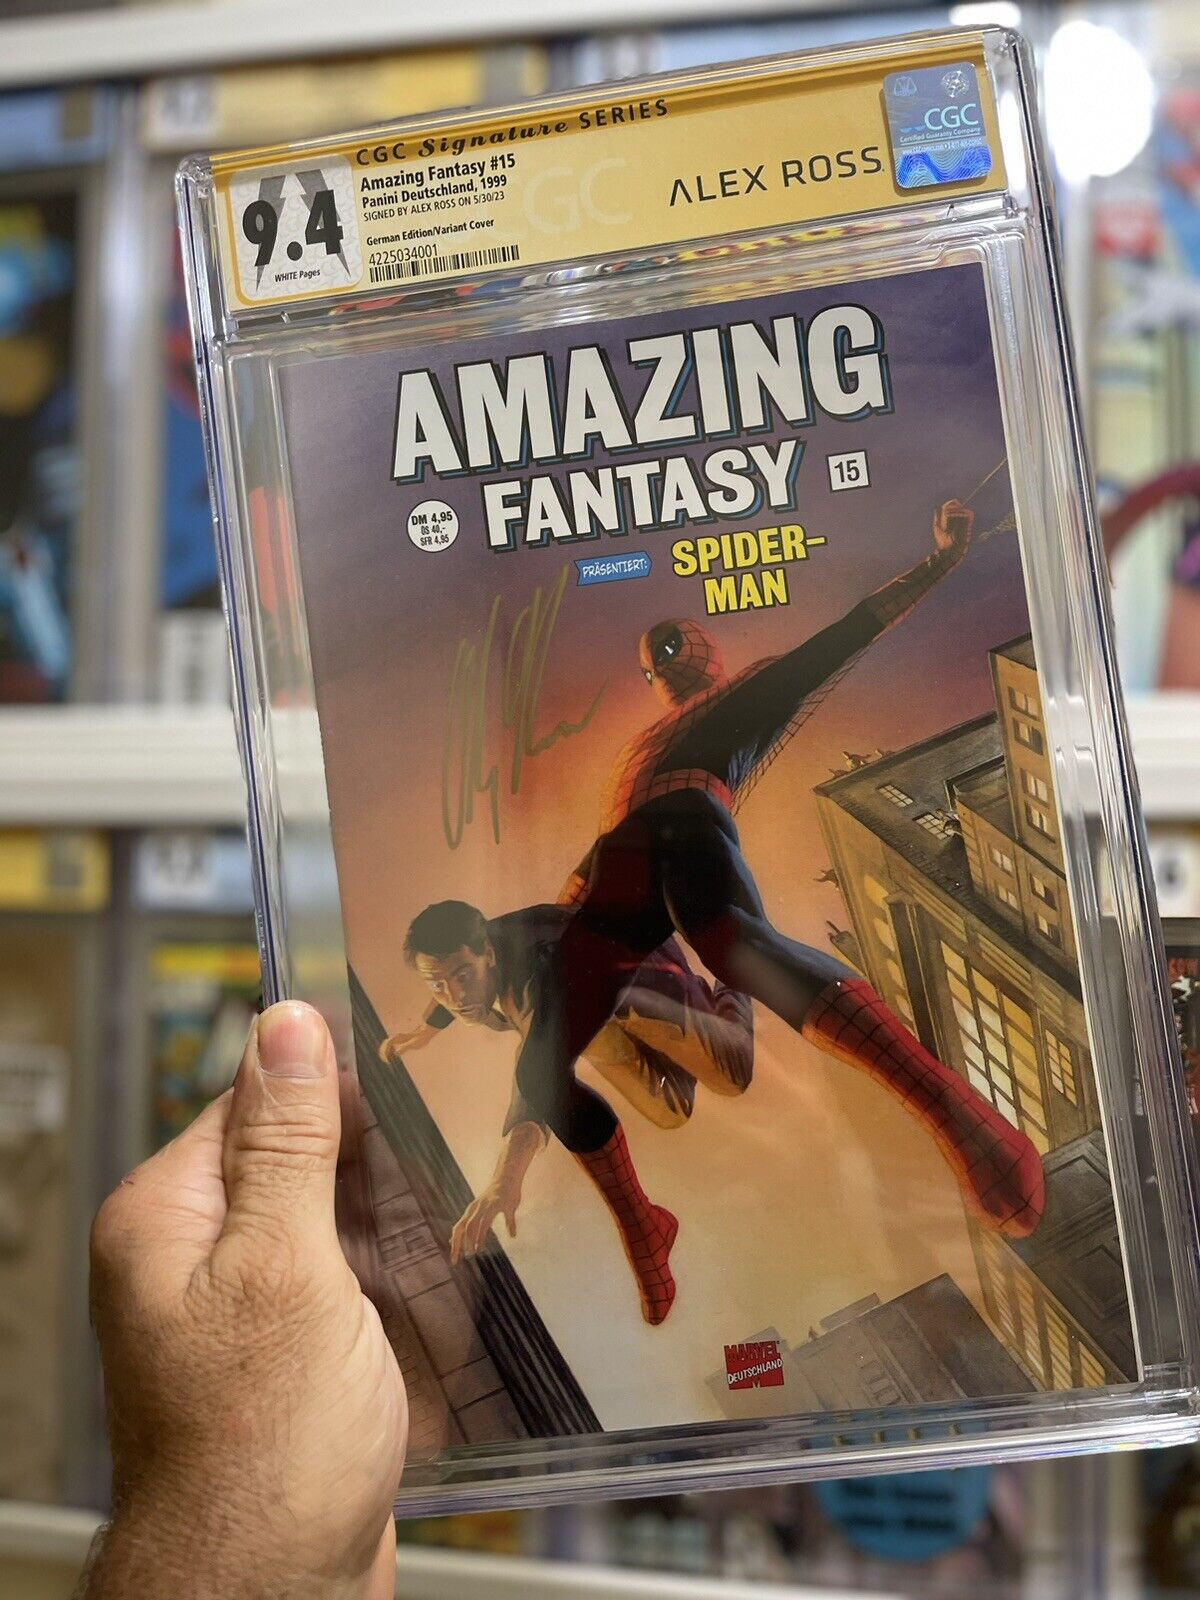 AMAZING FANTASY #15 CGC 9.4, German Edition Variant cover SIGNED BY ALEX ROSS🔥